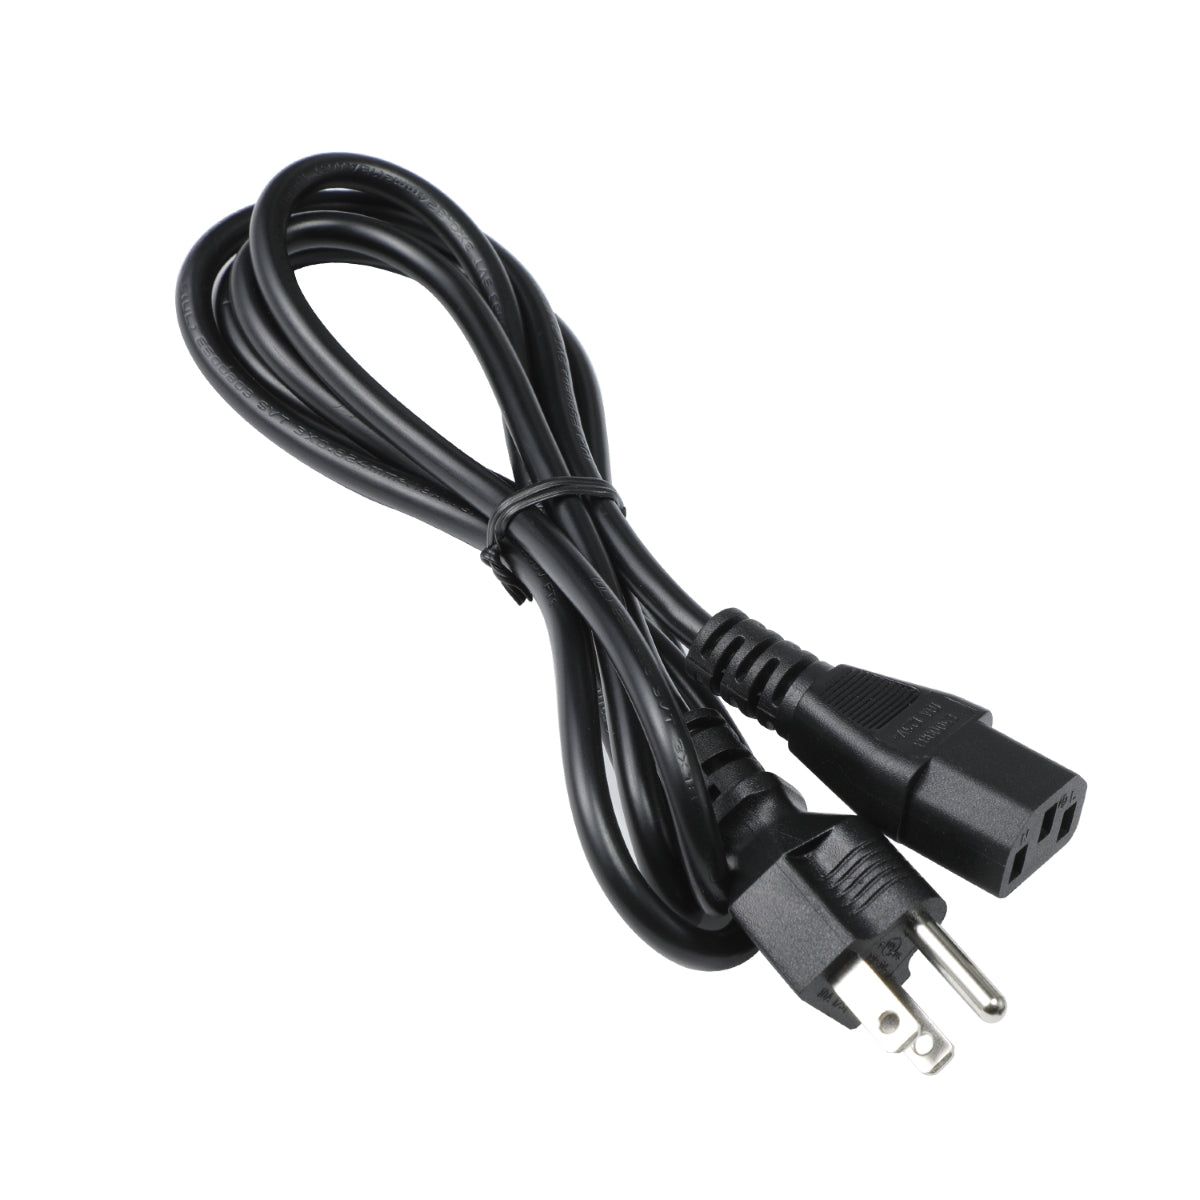 Power Cord for Samsung ProXpress C3060FW Printer.